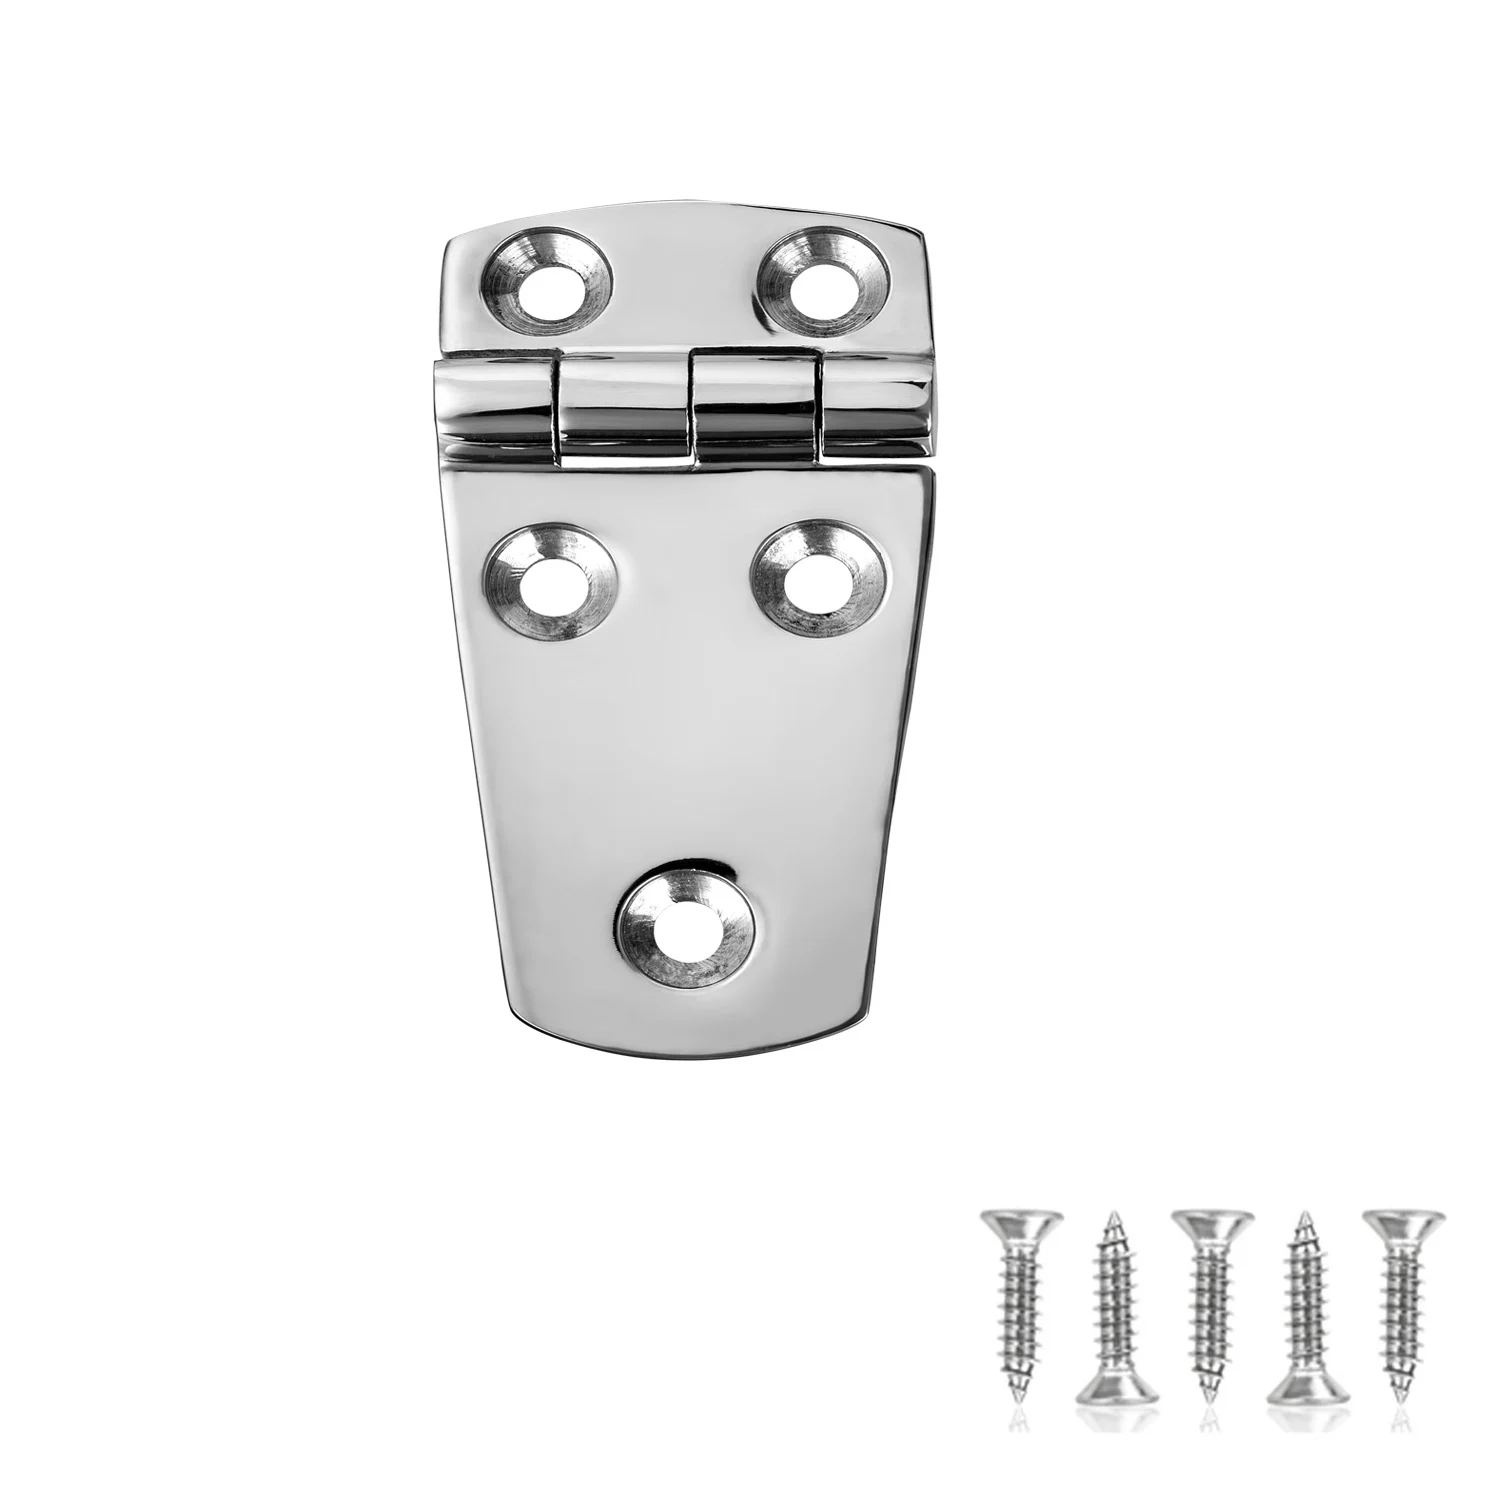 Marine Boat Hatch Hinges Stainless Steel, 3 Inch X 1.5 Inches(76 X 38MM) 5 Holes, No Noise, Heavy Duty 316 Ss with Screws boat hatch hinges marine hinges stainless steel 3 x 1 5 inches 76 x 38mm heavy duty 316 ss with screws 1 pcs